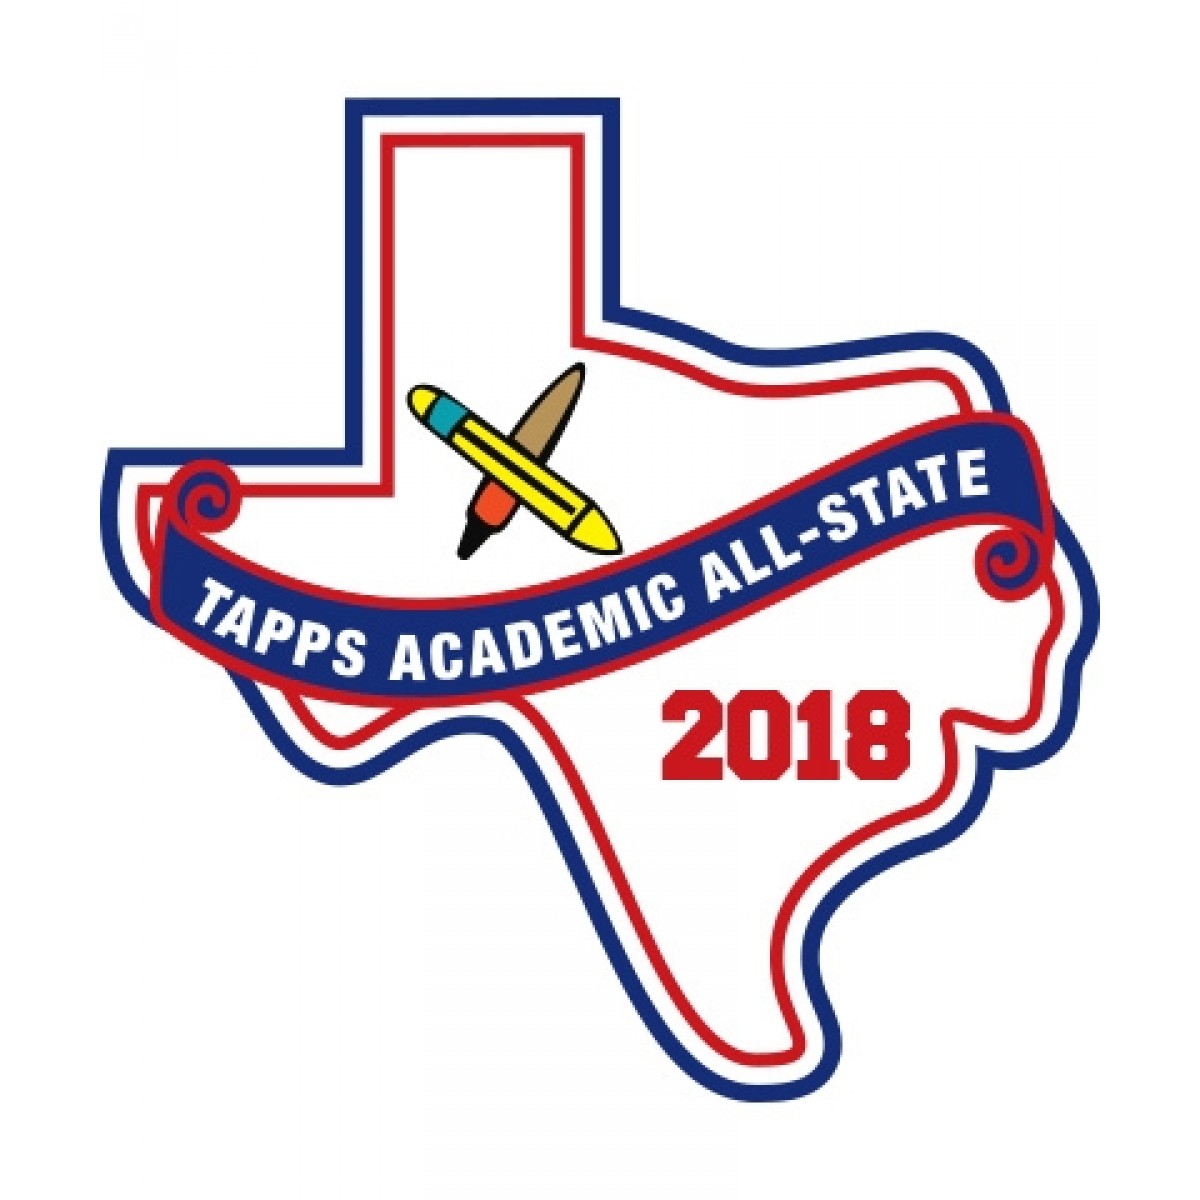 Felt 2018 TAPPS Academic All State Patch